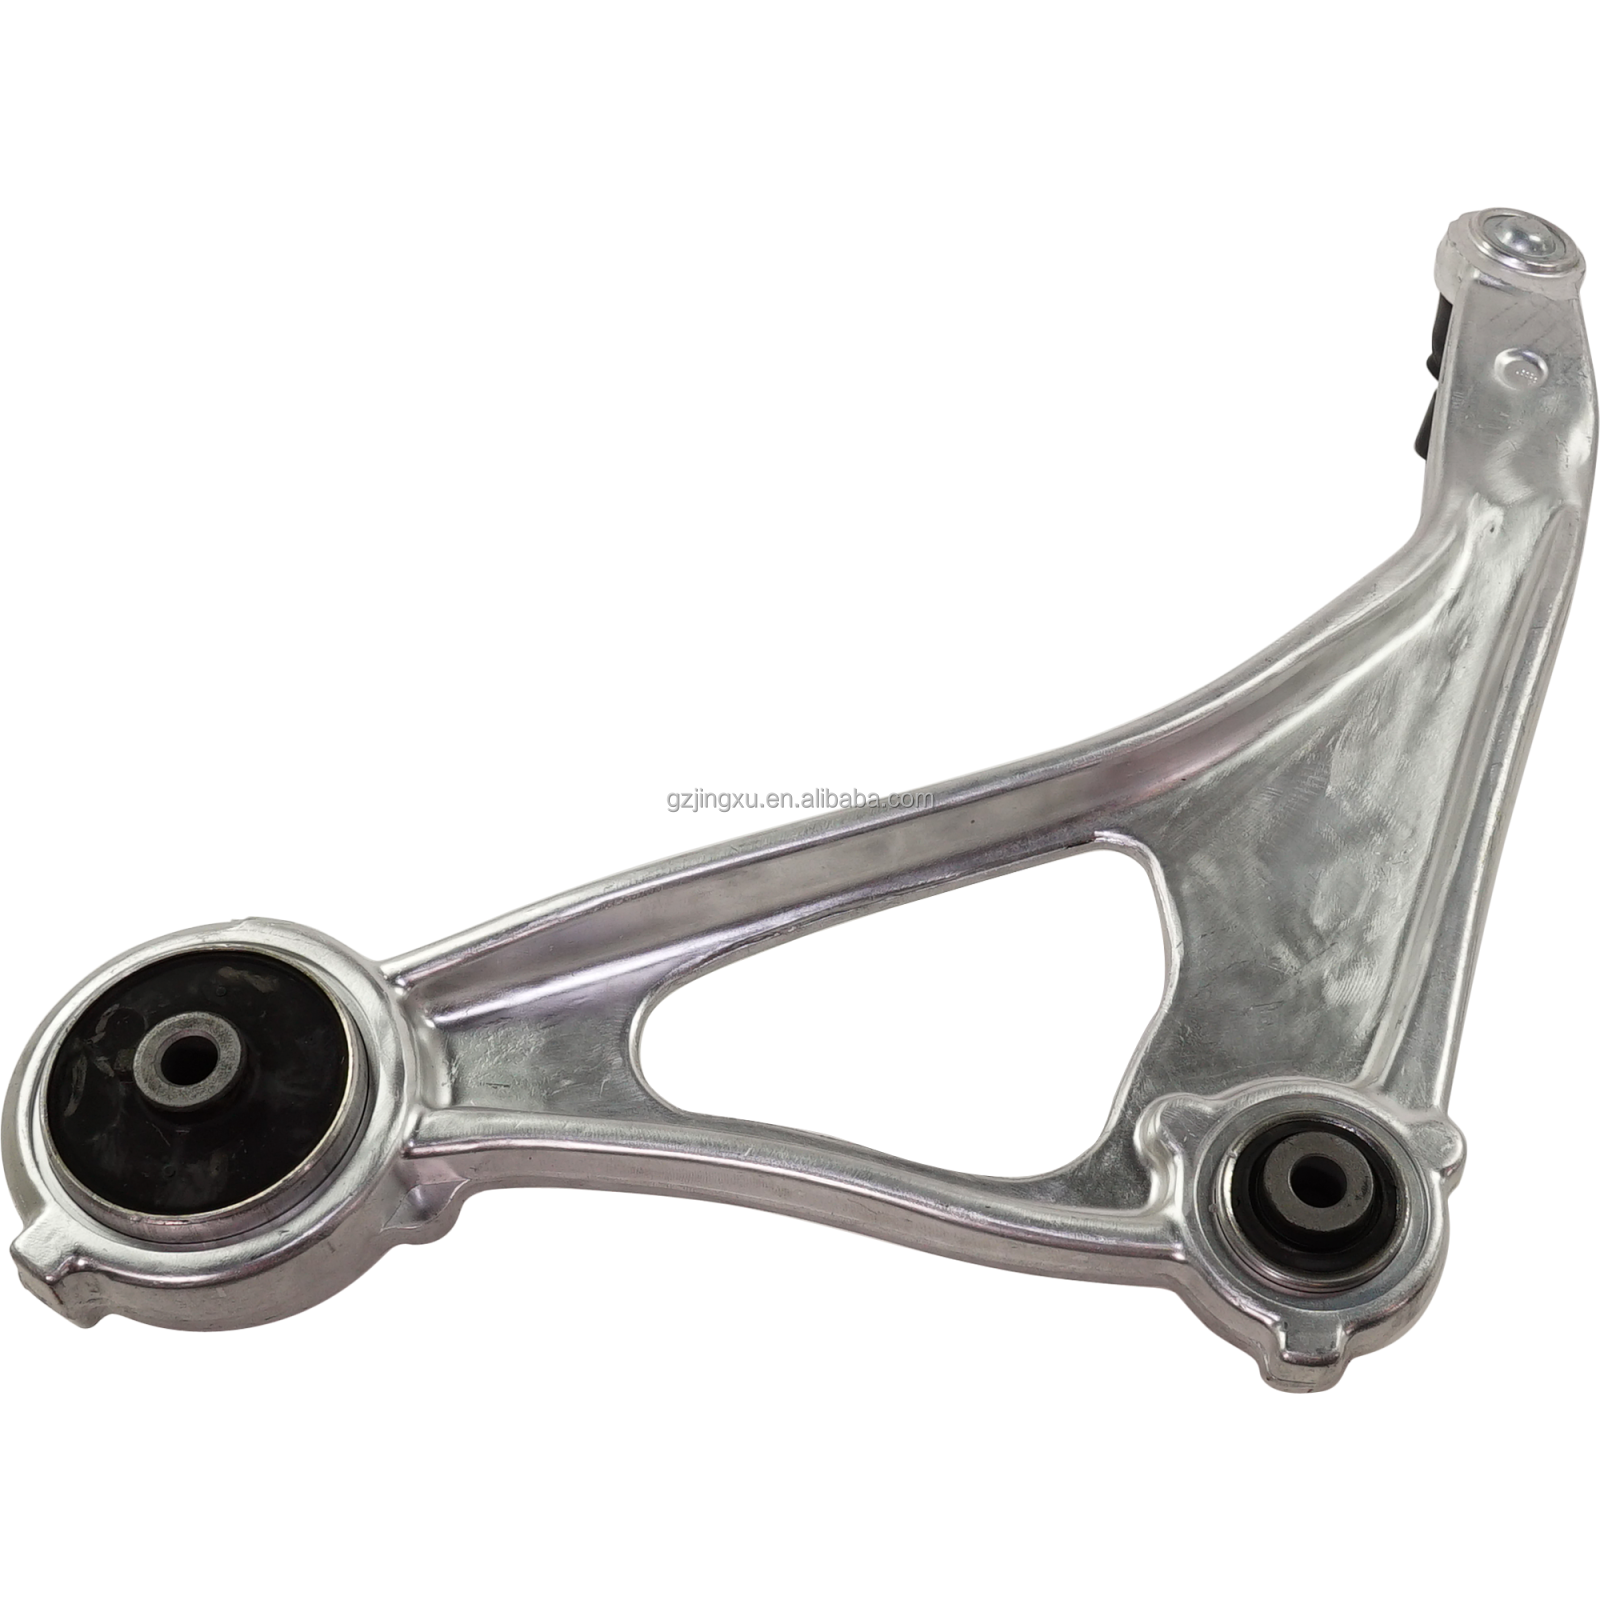 545009Hp0A 545019HP0A Front Lower Rh Suspension Control Arm Japanese Car For Nissan Altima 545009Hp0A 545019HP0A